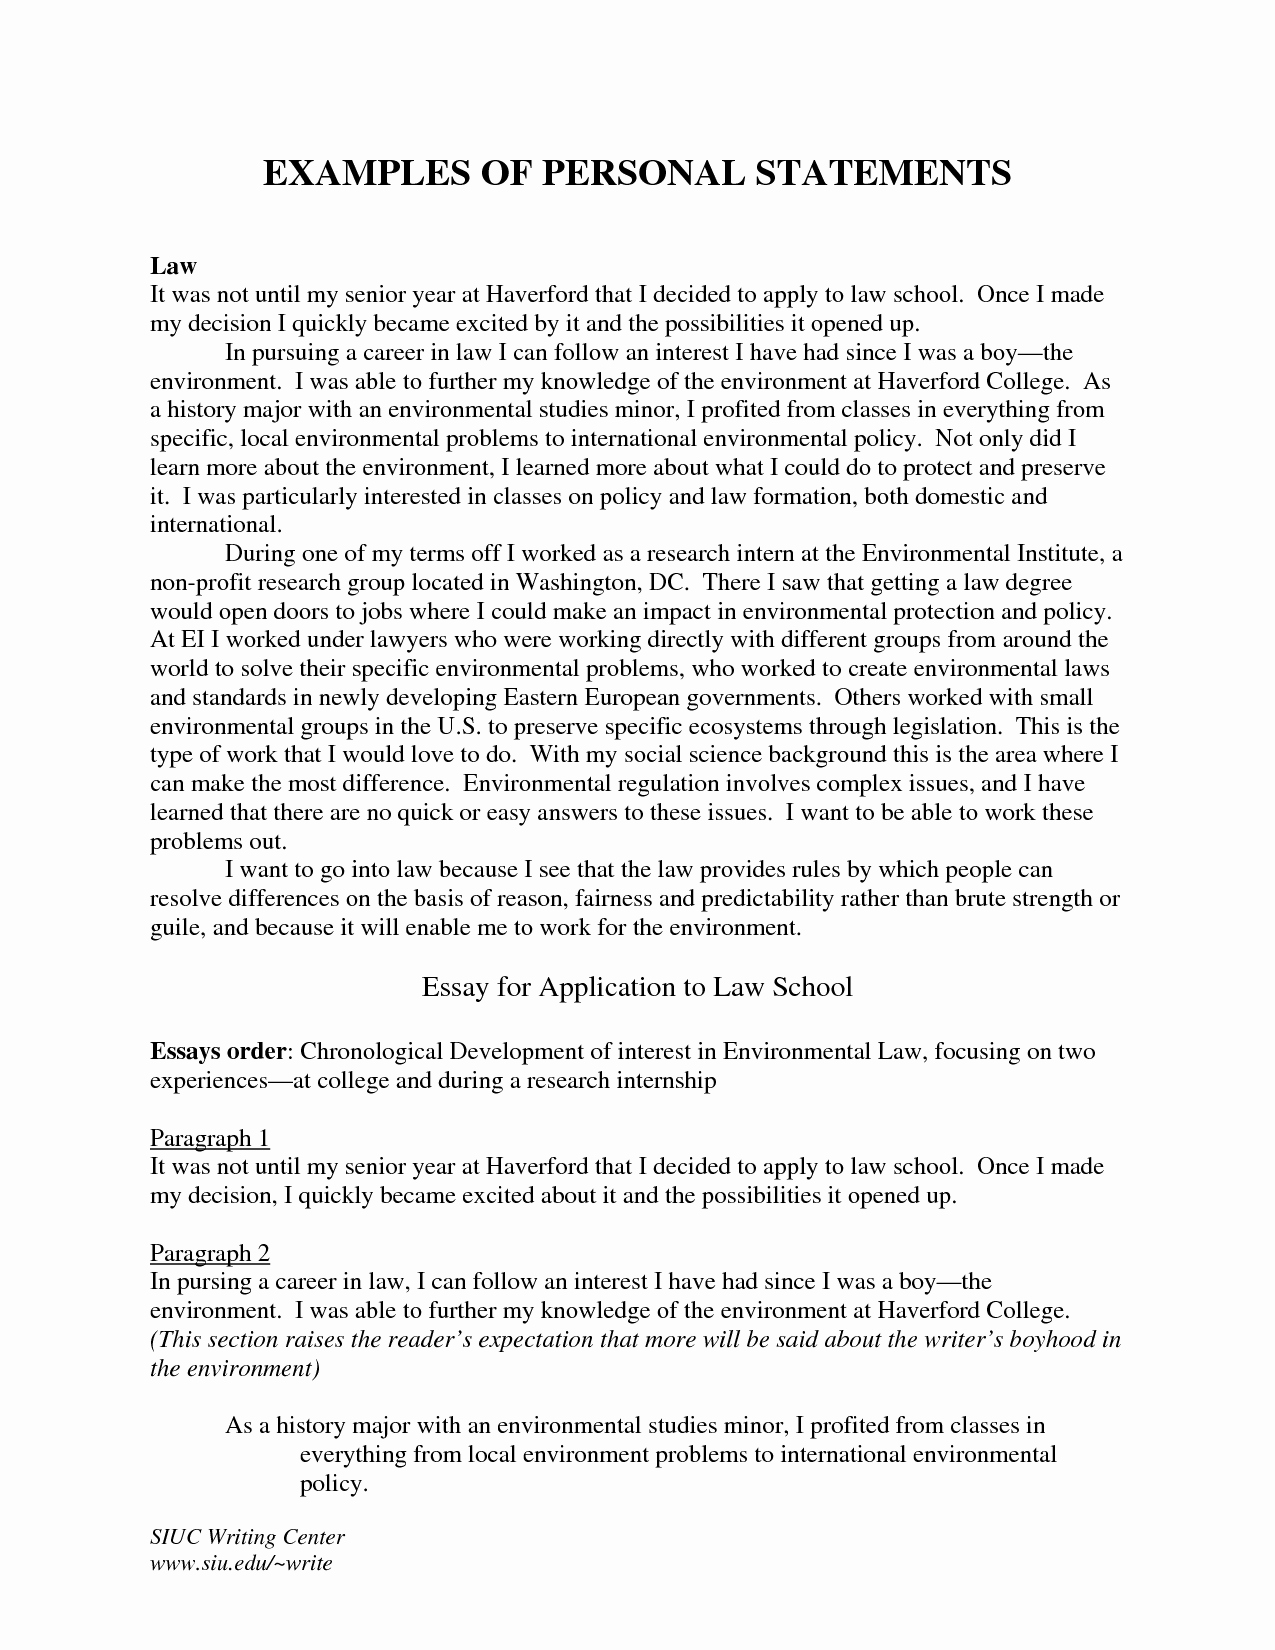 Personal History Statement Sample Best Of Sample Personal Statement for Graduate School In History